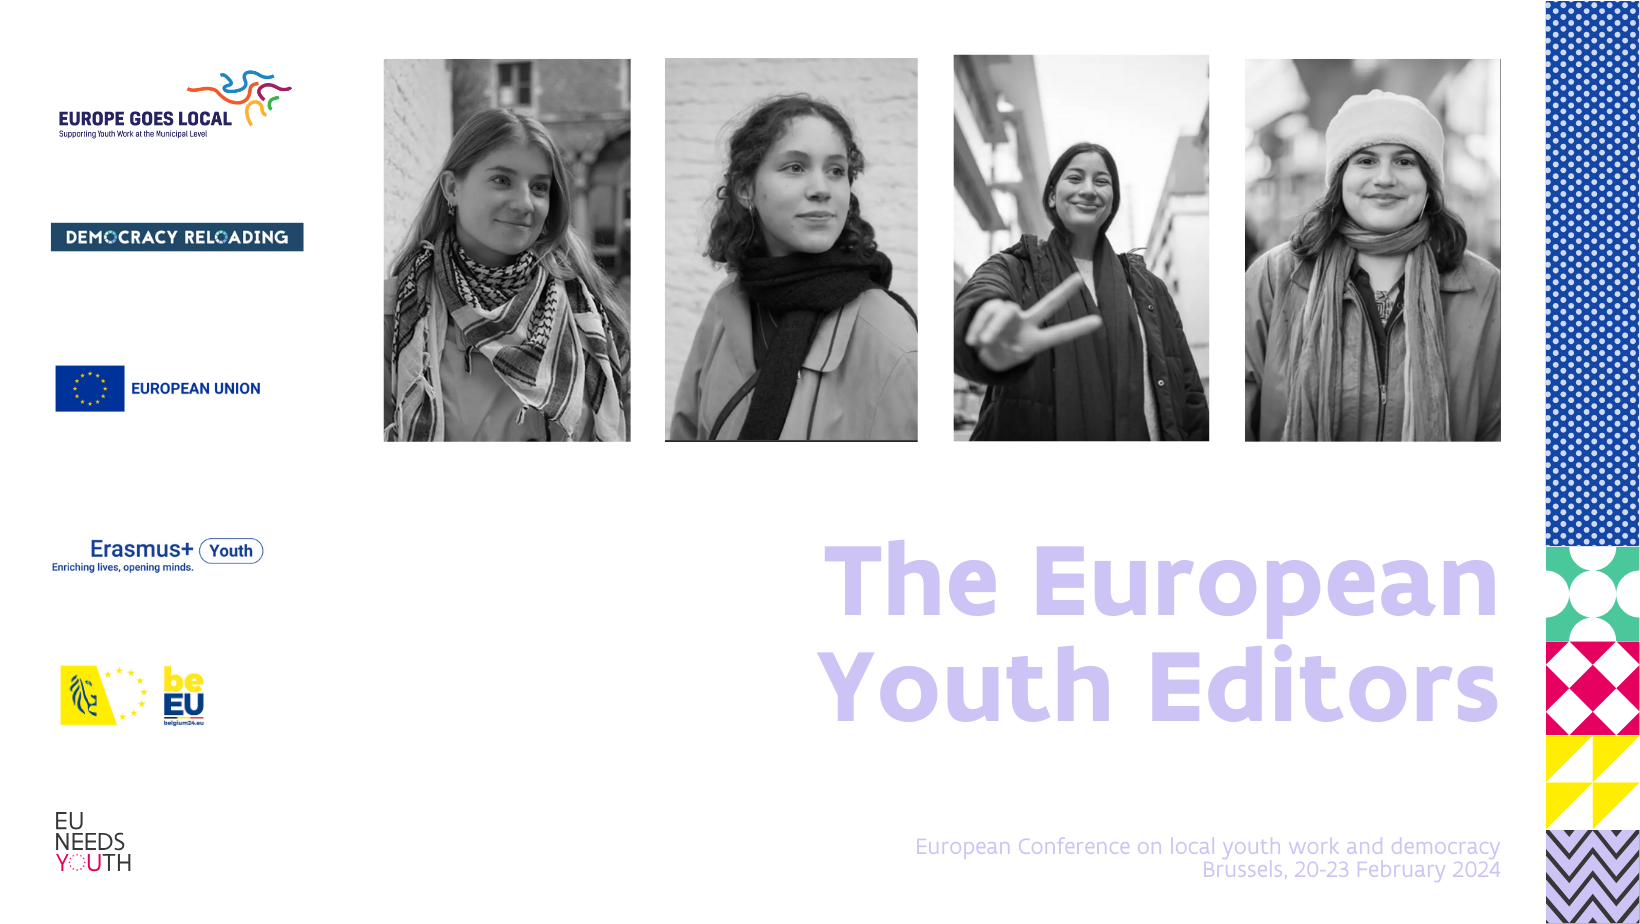 The European Youth Editors